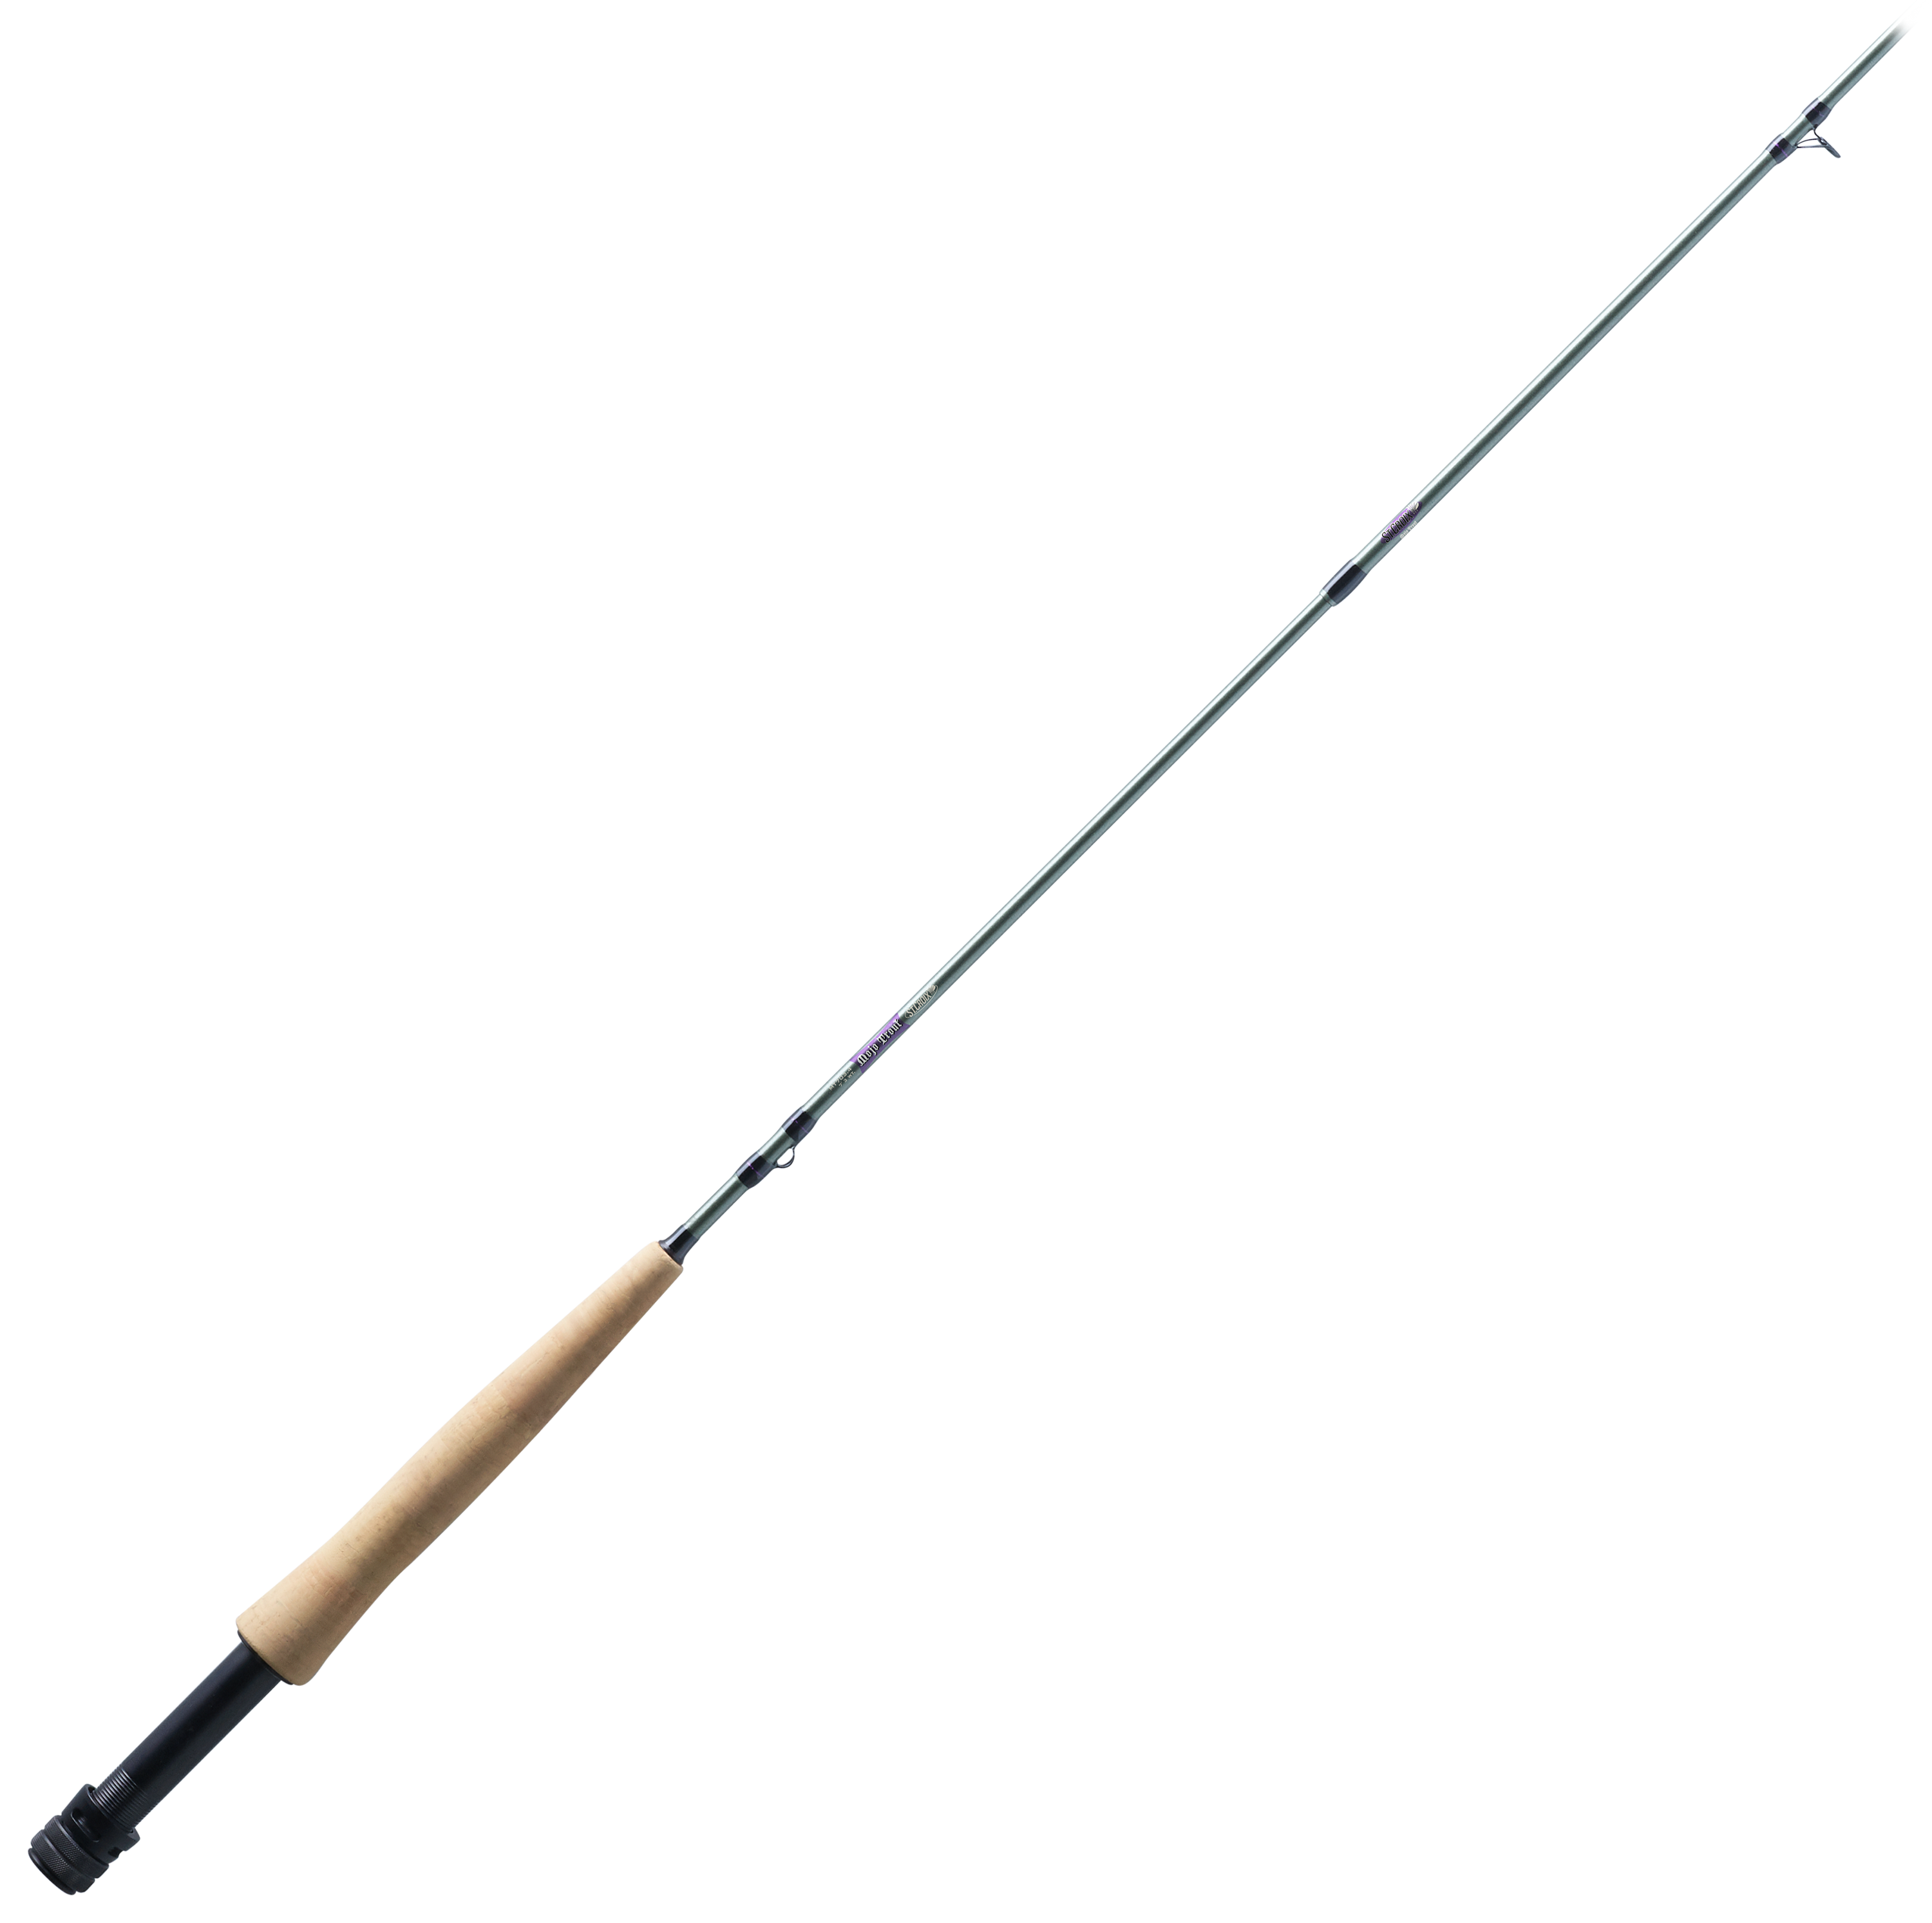 St. Croix Mojo Trout Fly Rod - MT804.4